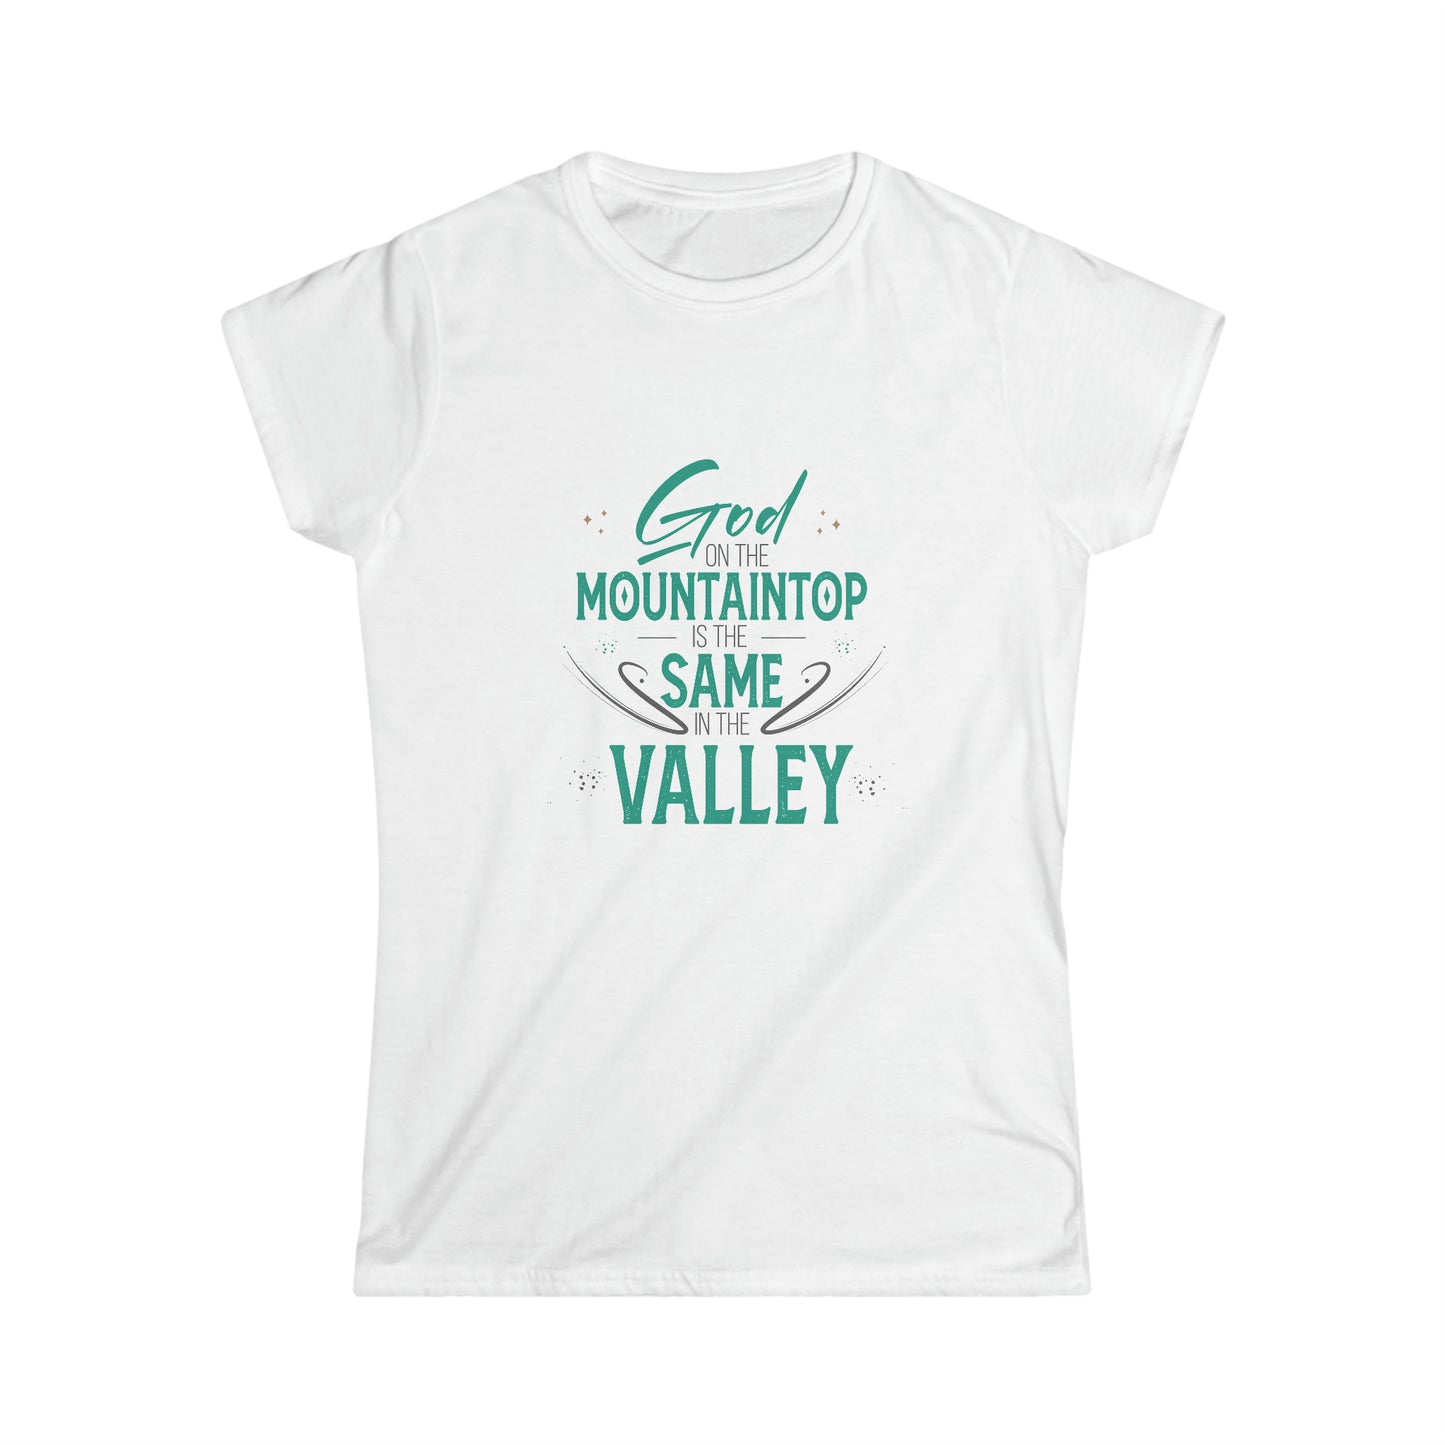 God On The Mountaintop Is The Same In The Valley Women's T-shirt